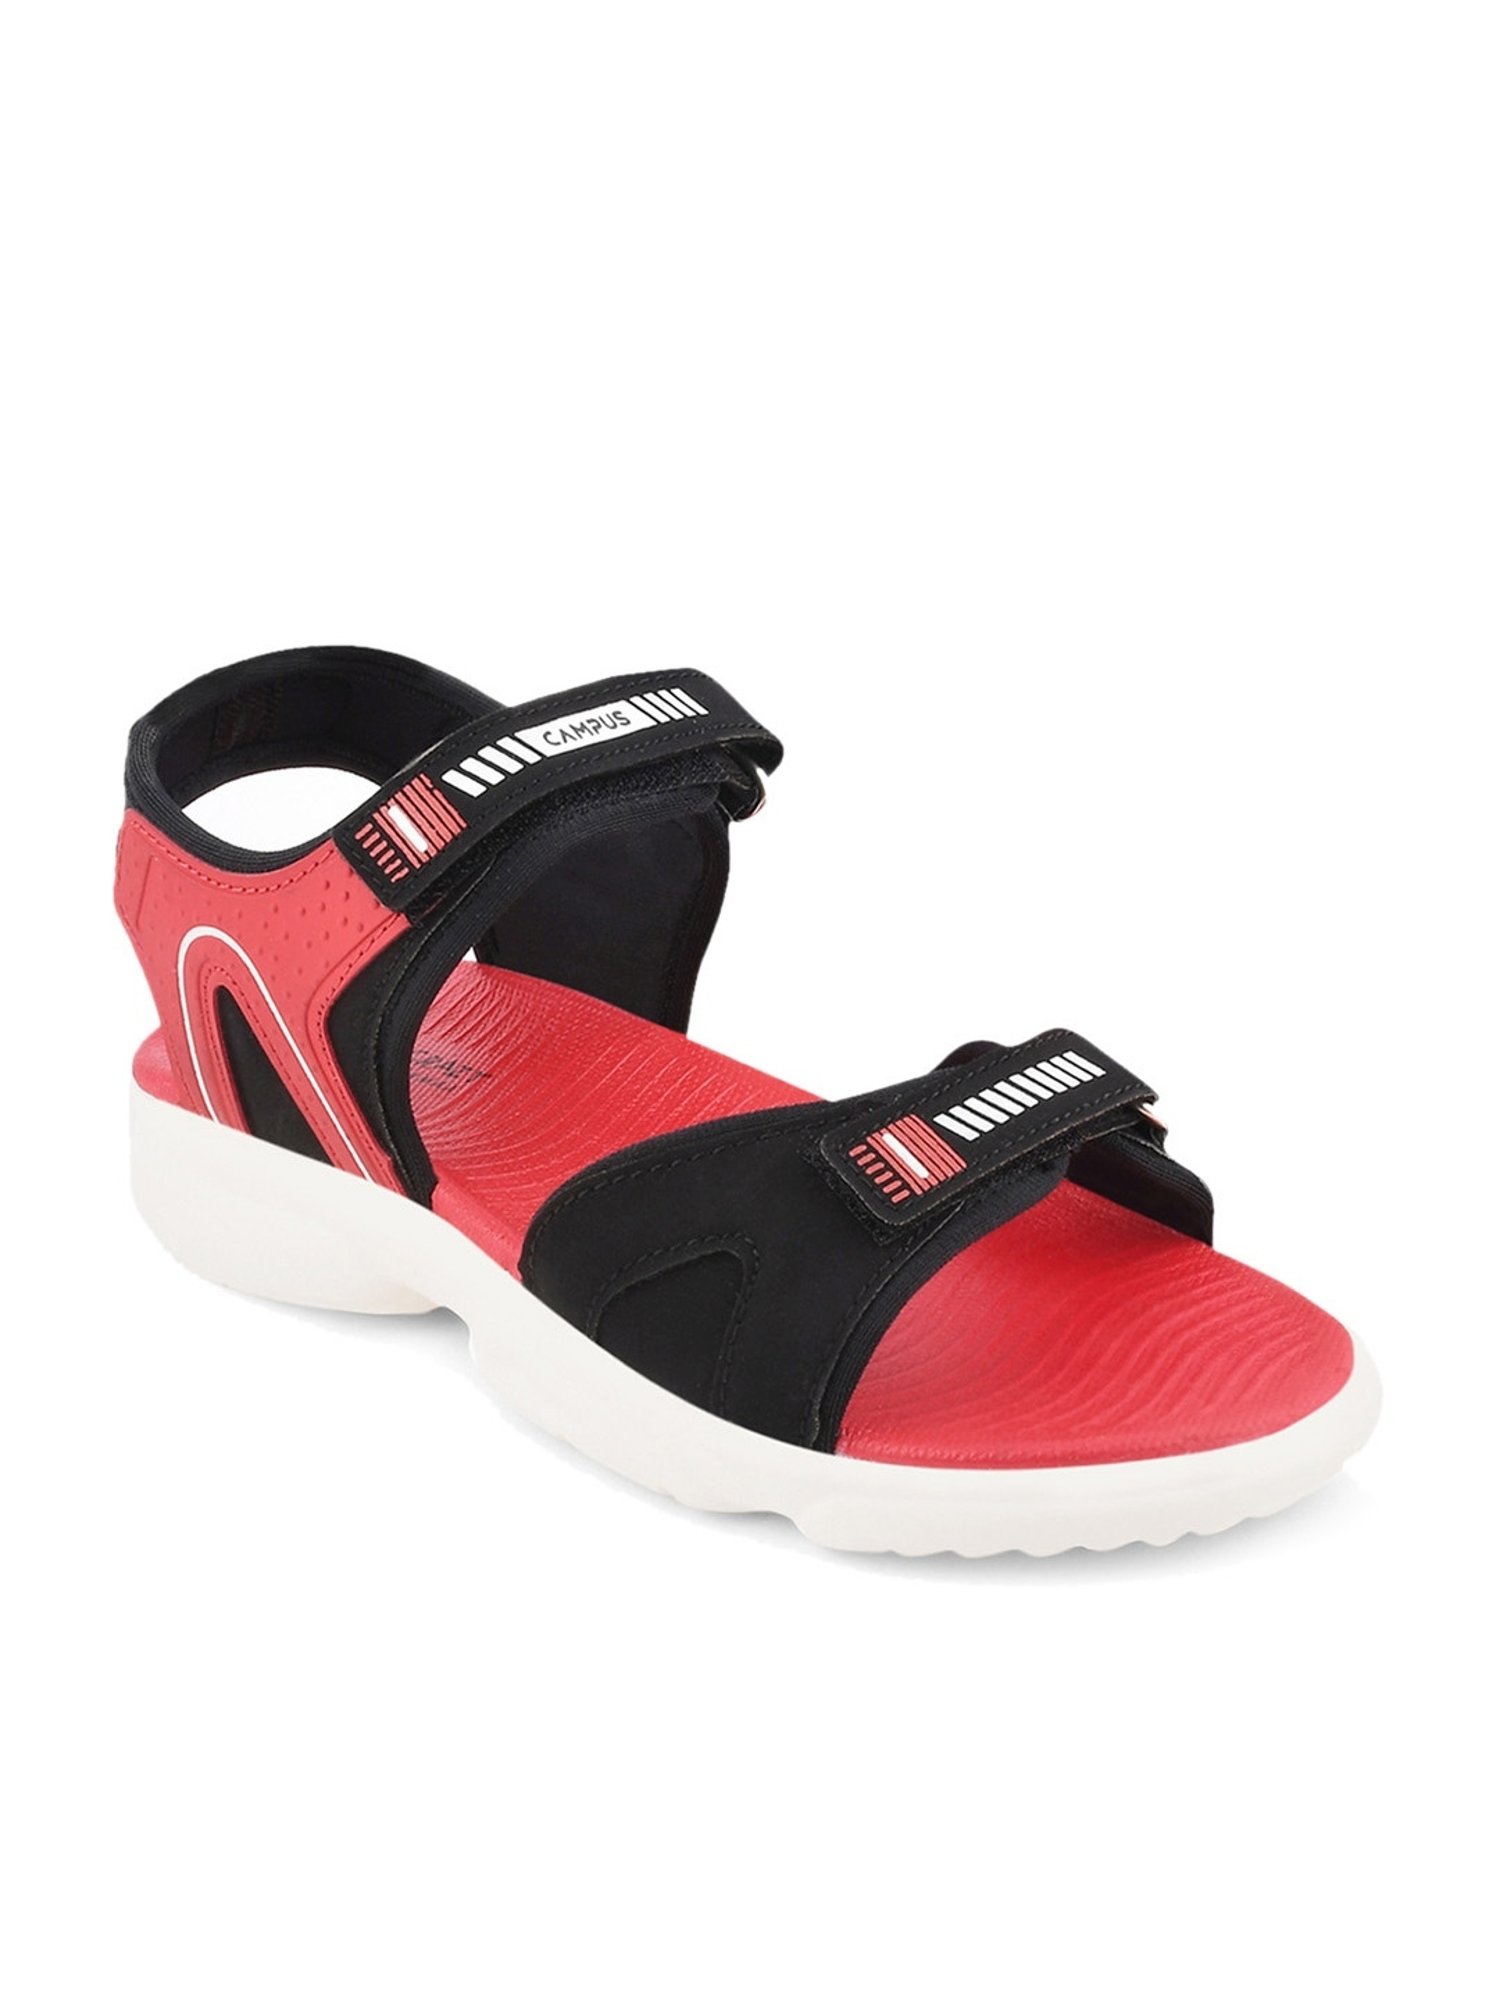 Campus Sandals : Buy Campus GC-22925C Red Kids Sandals Online | Nykaa  Fashion.